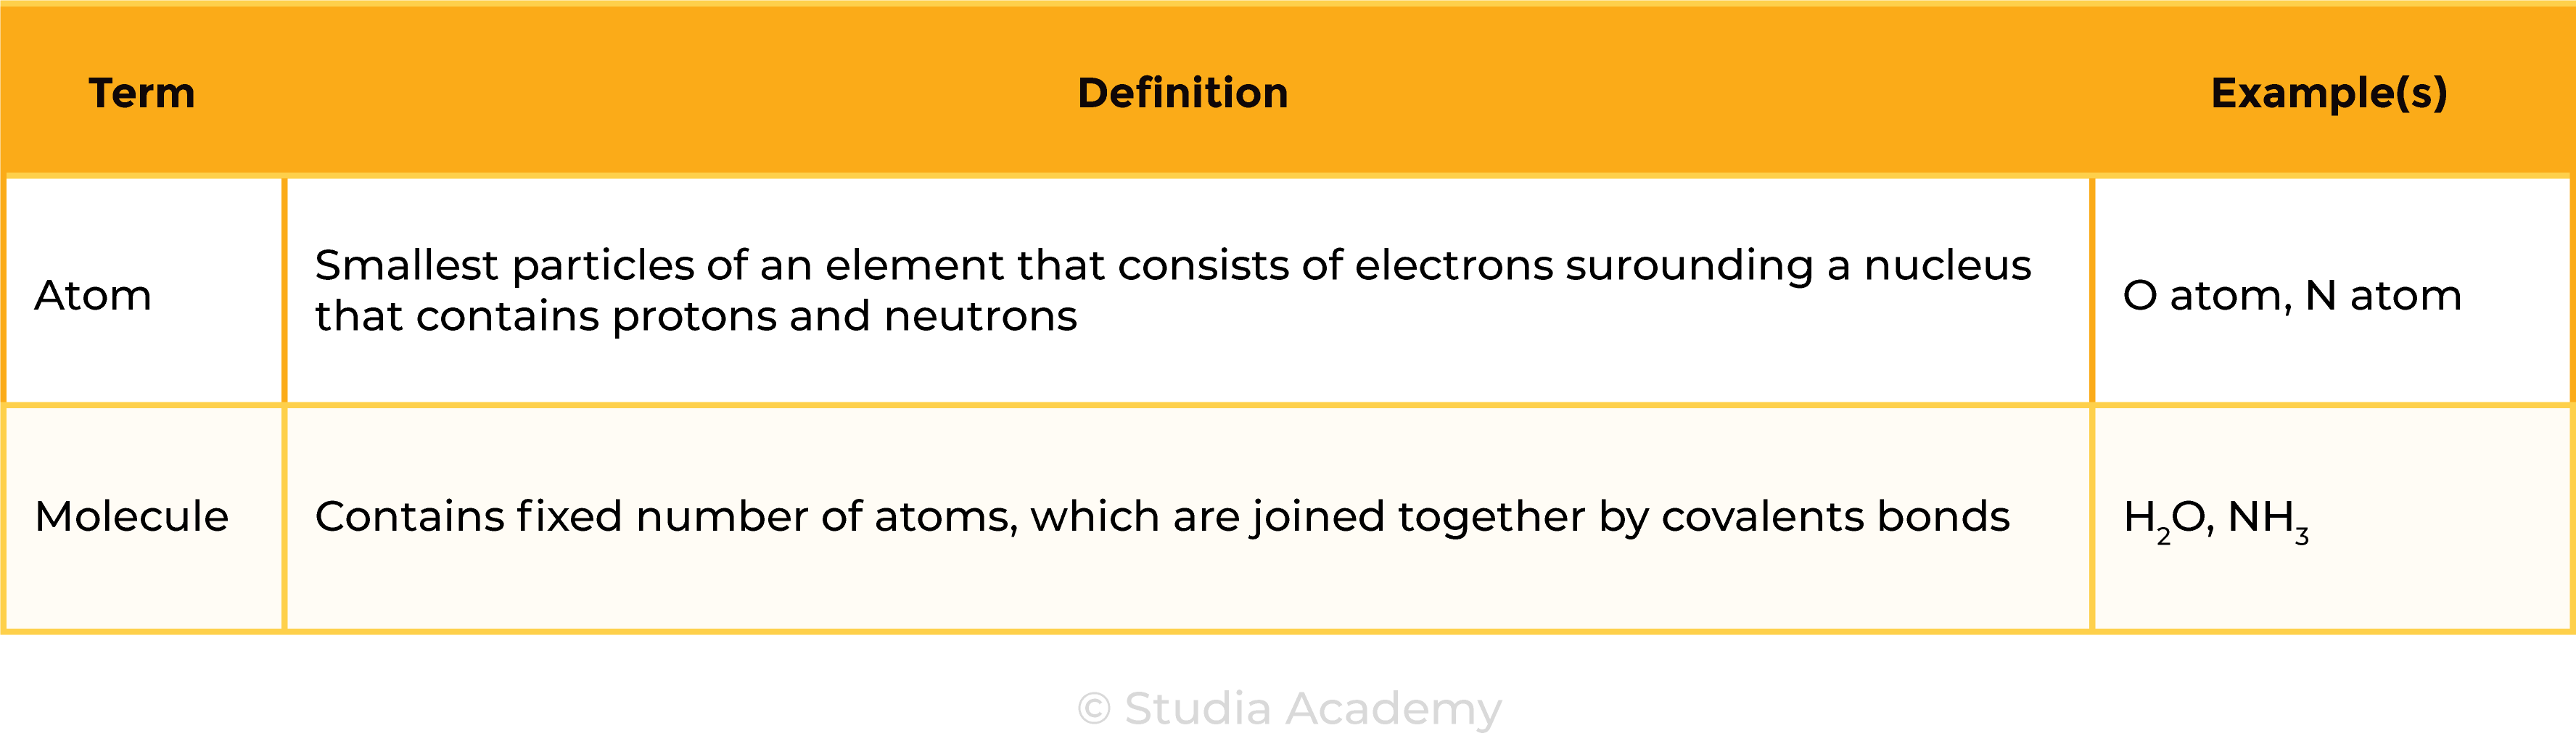 edexcel_igcse_chemistry_topic 03 tables_atomic structure_001_atom and molecule definitions